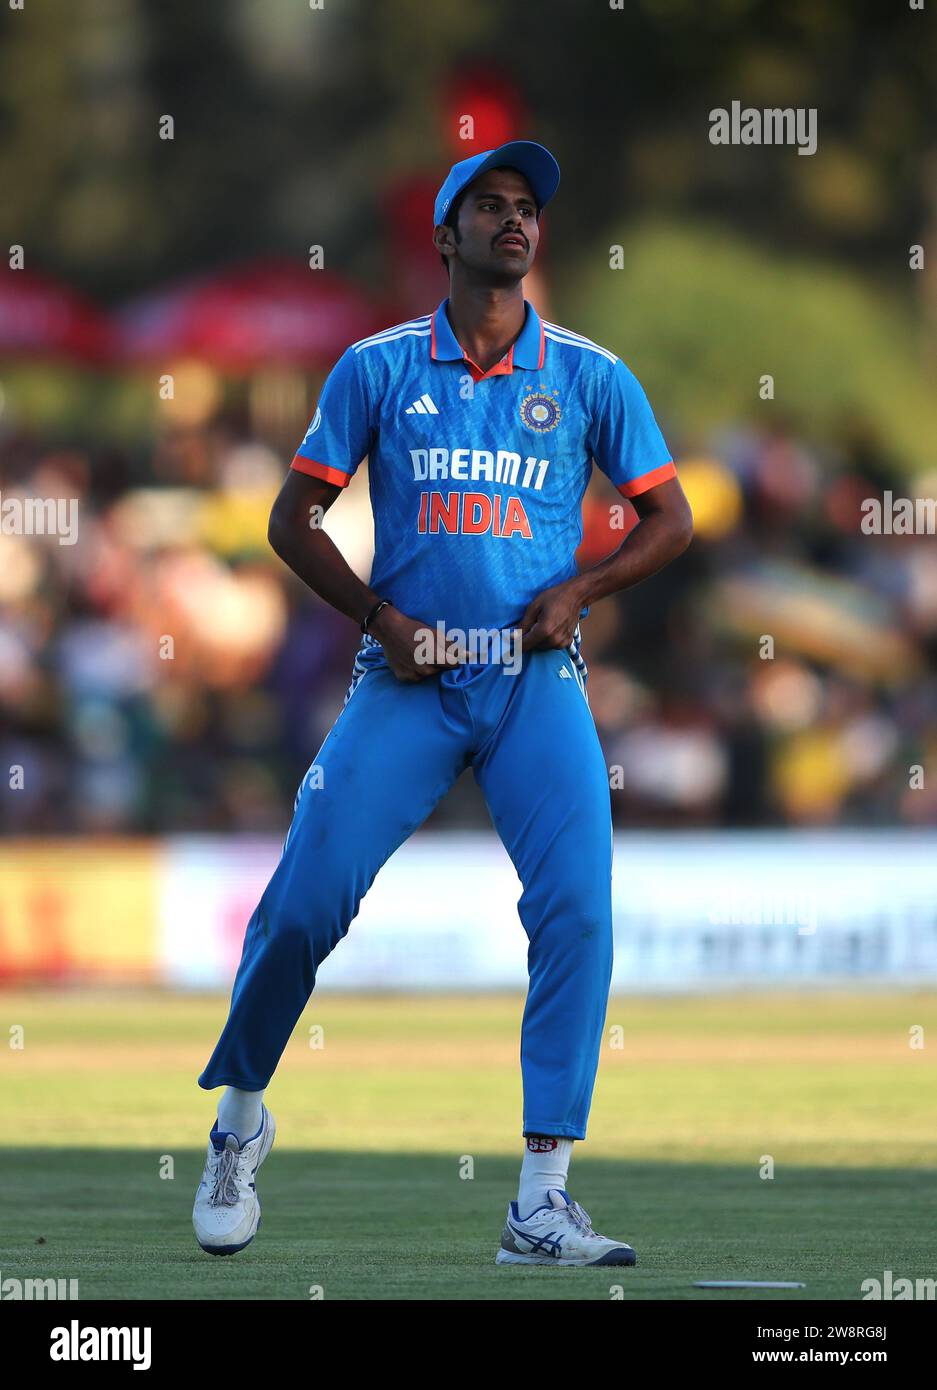 PAARL, SOUTH AFRICA - DECEMBER 21: Washington Sundar of India during the 3rd One Day International match between South Africa and India at Boland Park on December 21, 2023 in Paarl, South Africa. Photo by Shaun Roy/Alamy Live News Stock Photo